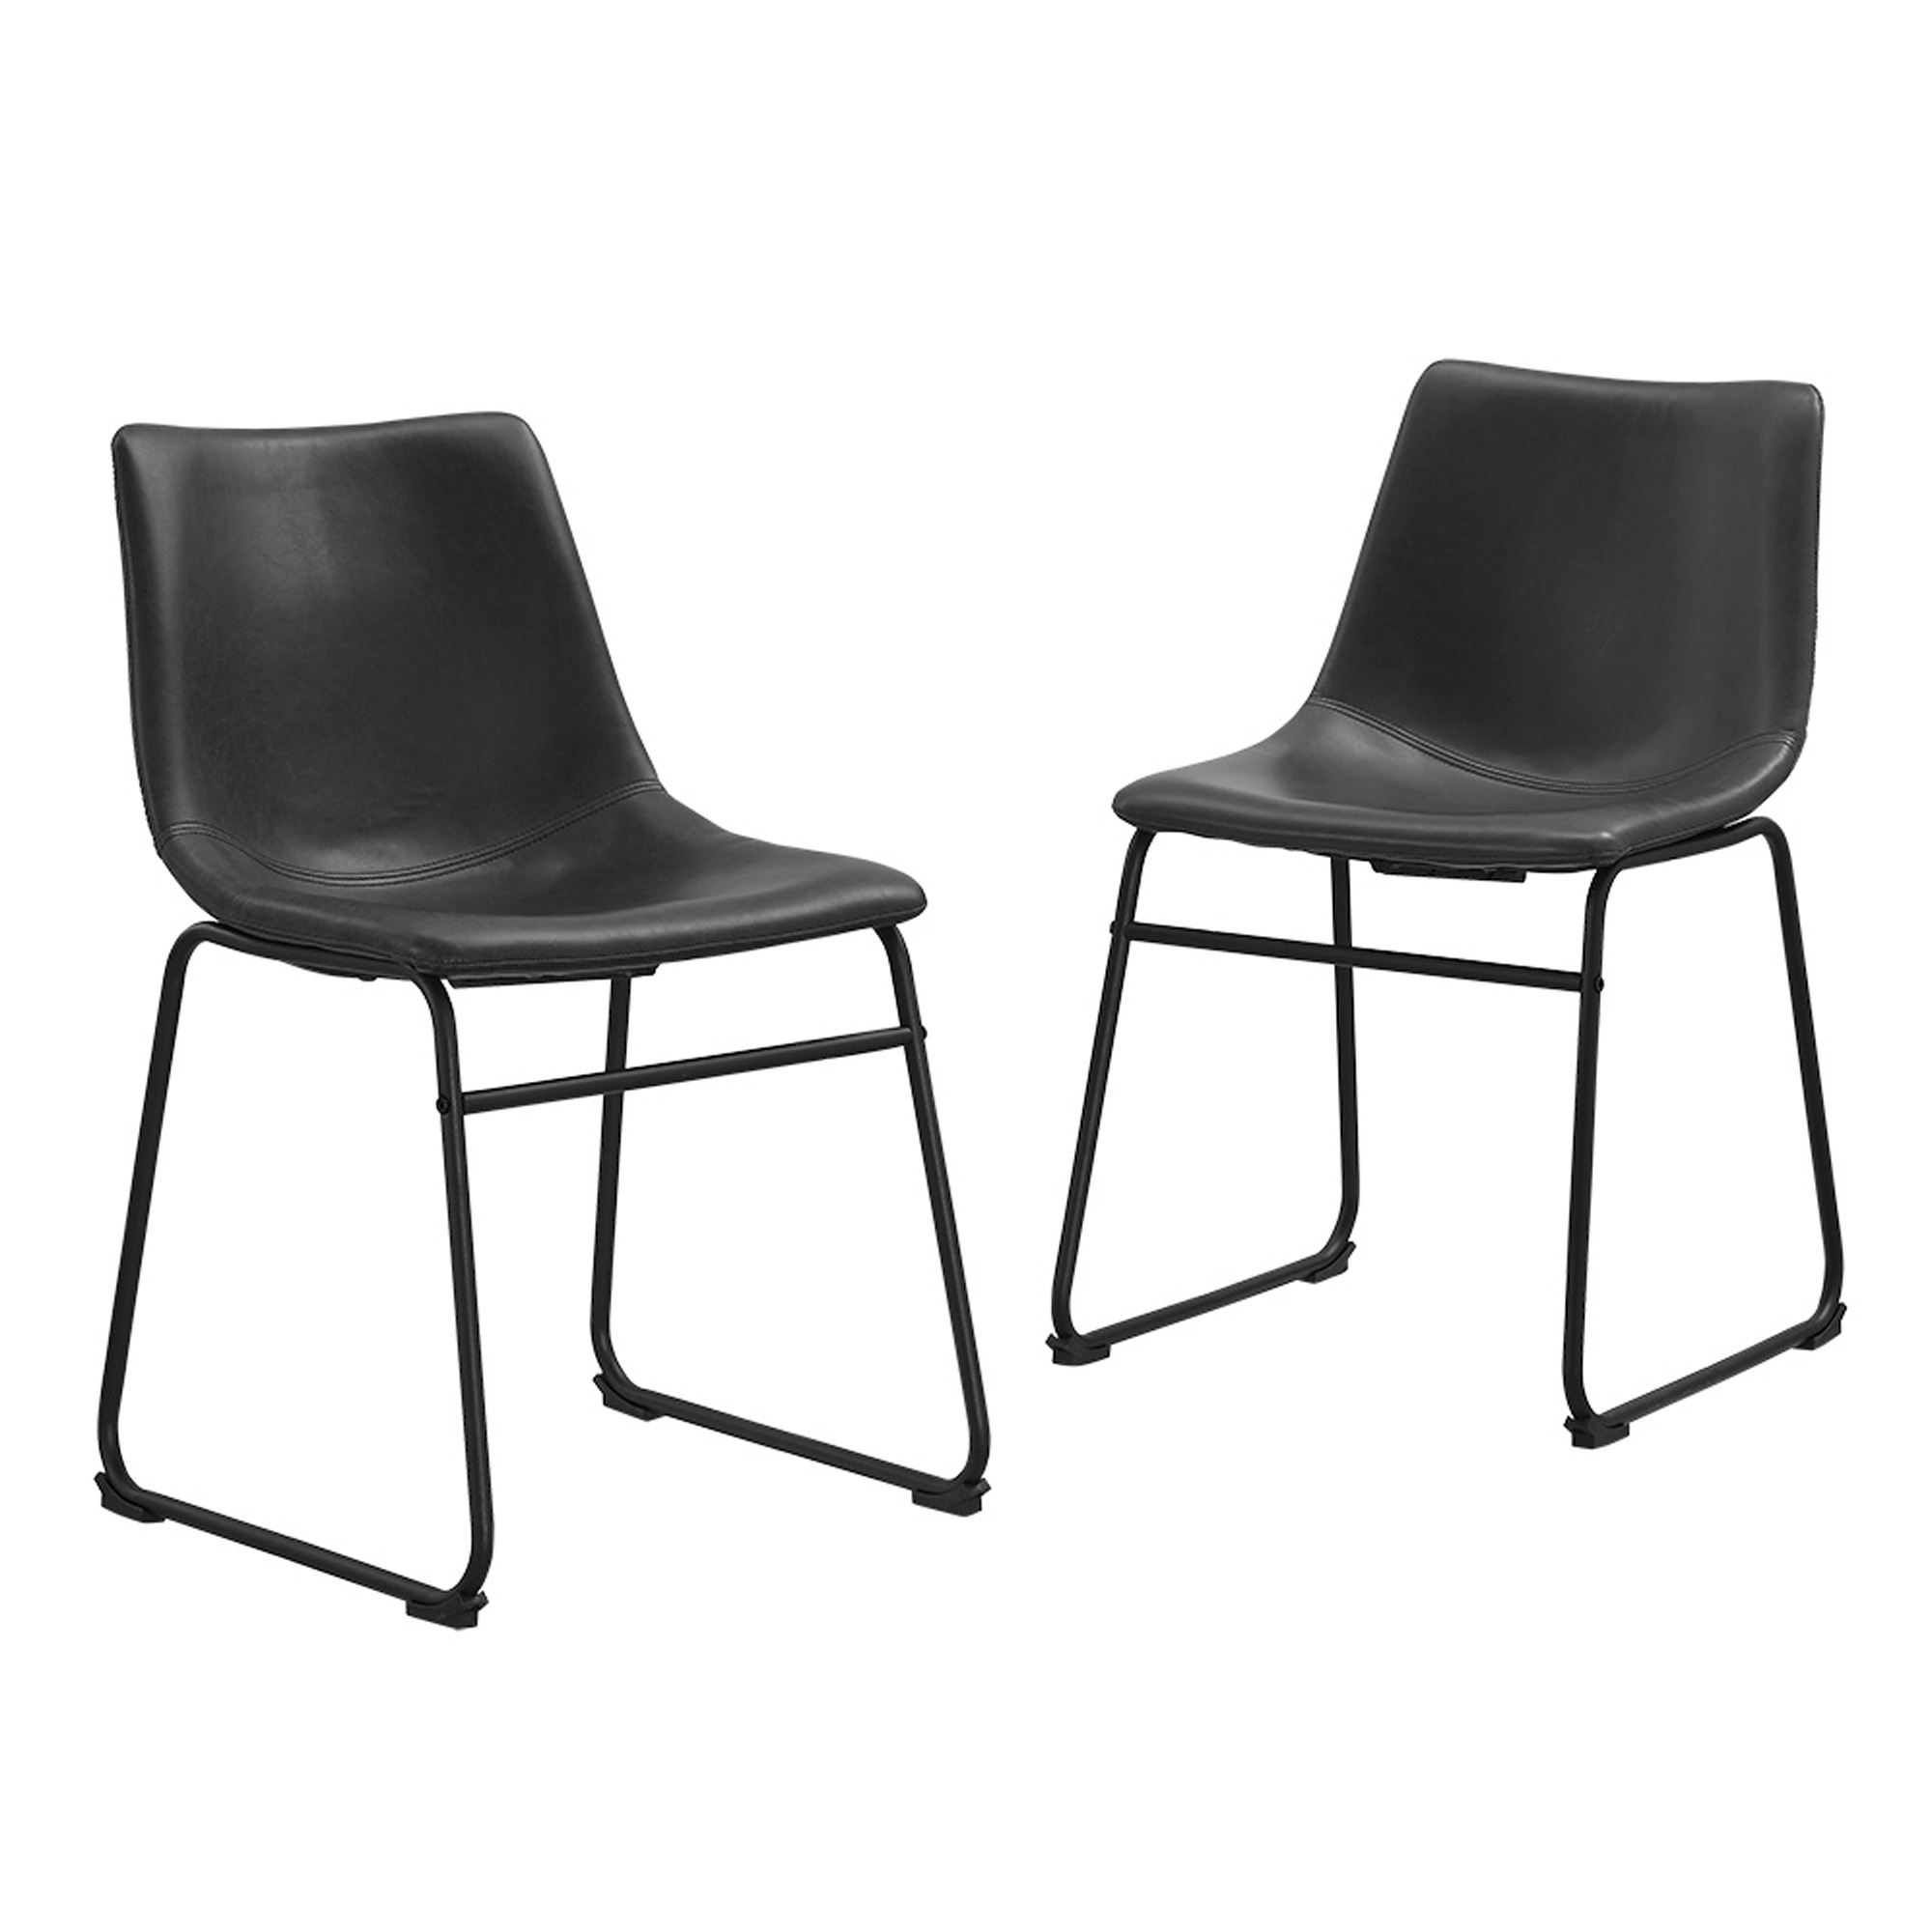 18" Industrial Faux Leather Dining Chair, Set of 2 - Black - Image 0